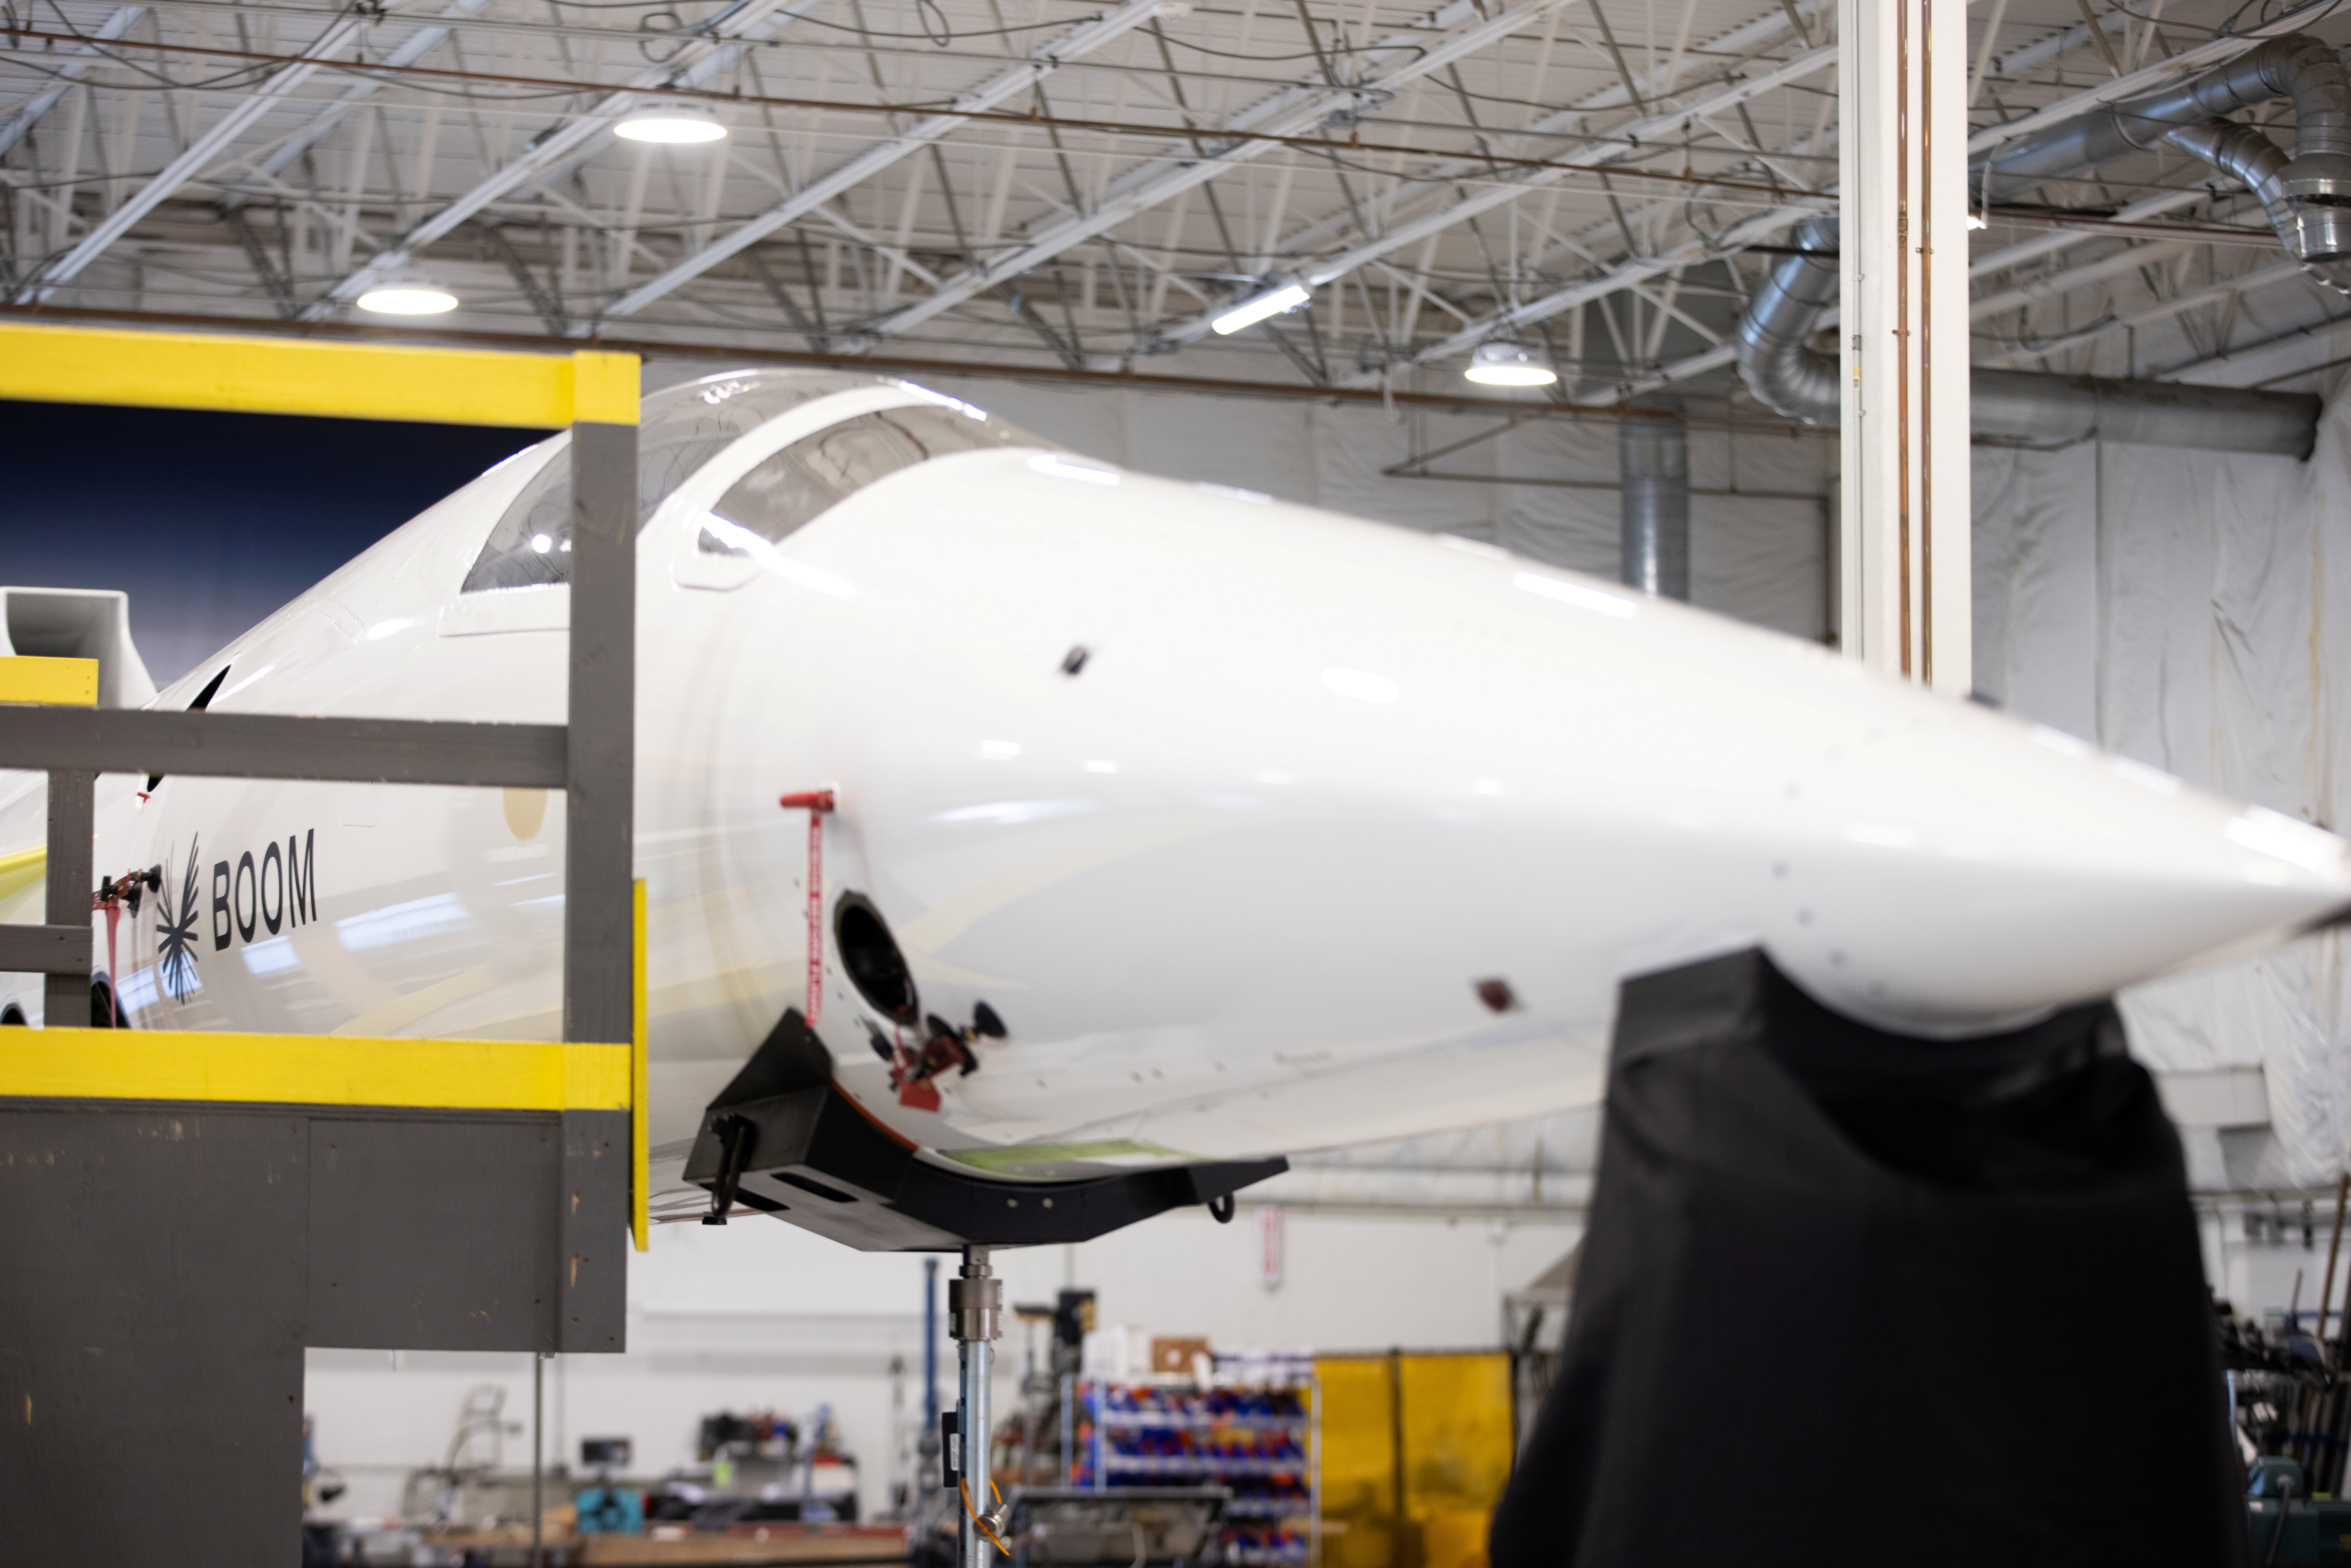 Boom Supersonic developing aircraft for trans-Atlantic commercial service